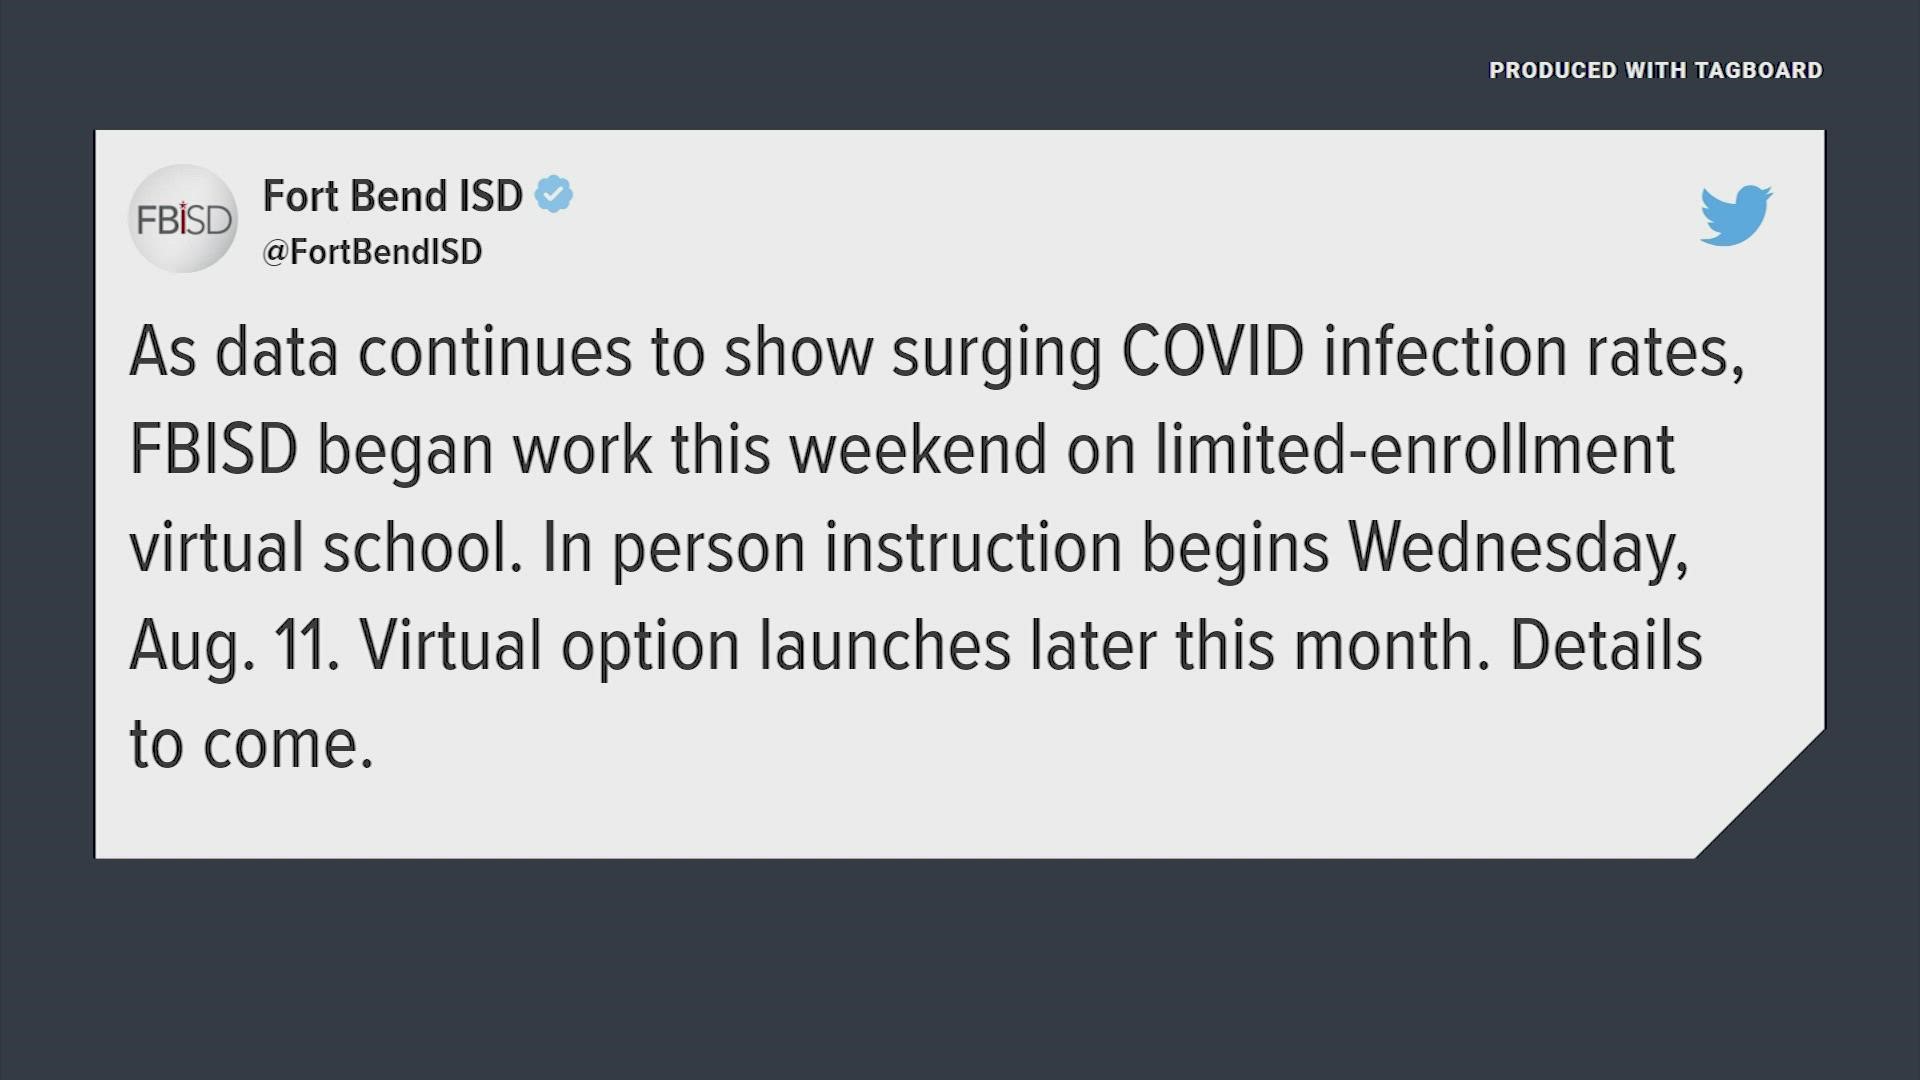 Ft. Bend ISD is the latest district to announce virtual learning. Conroe ISD made its announcement last week.